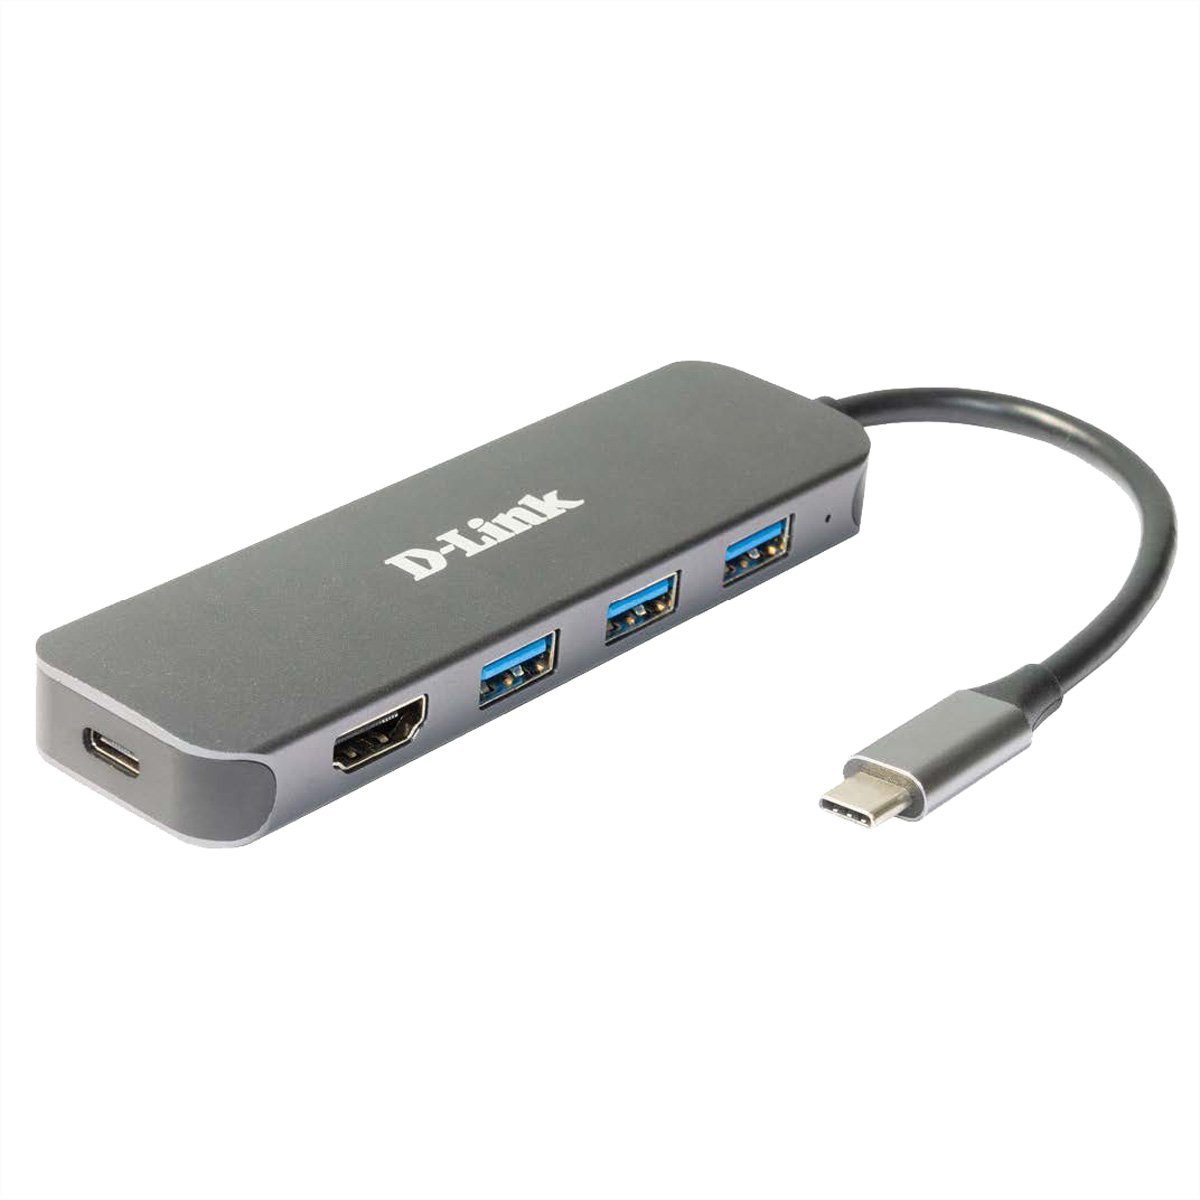 D-Link DUB-2333 5-in-1 USB-C Computer-Adapter Delivery HDMI/Power mit Hub